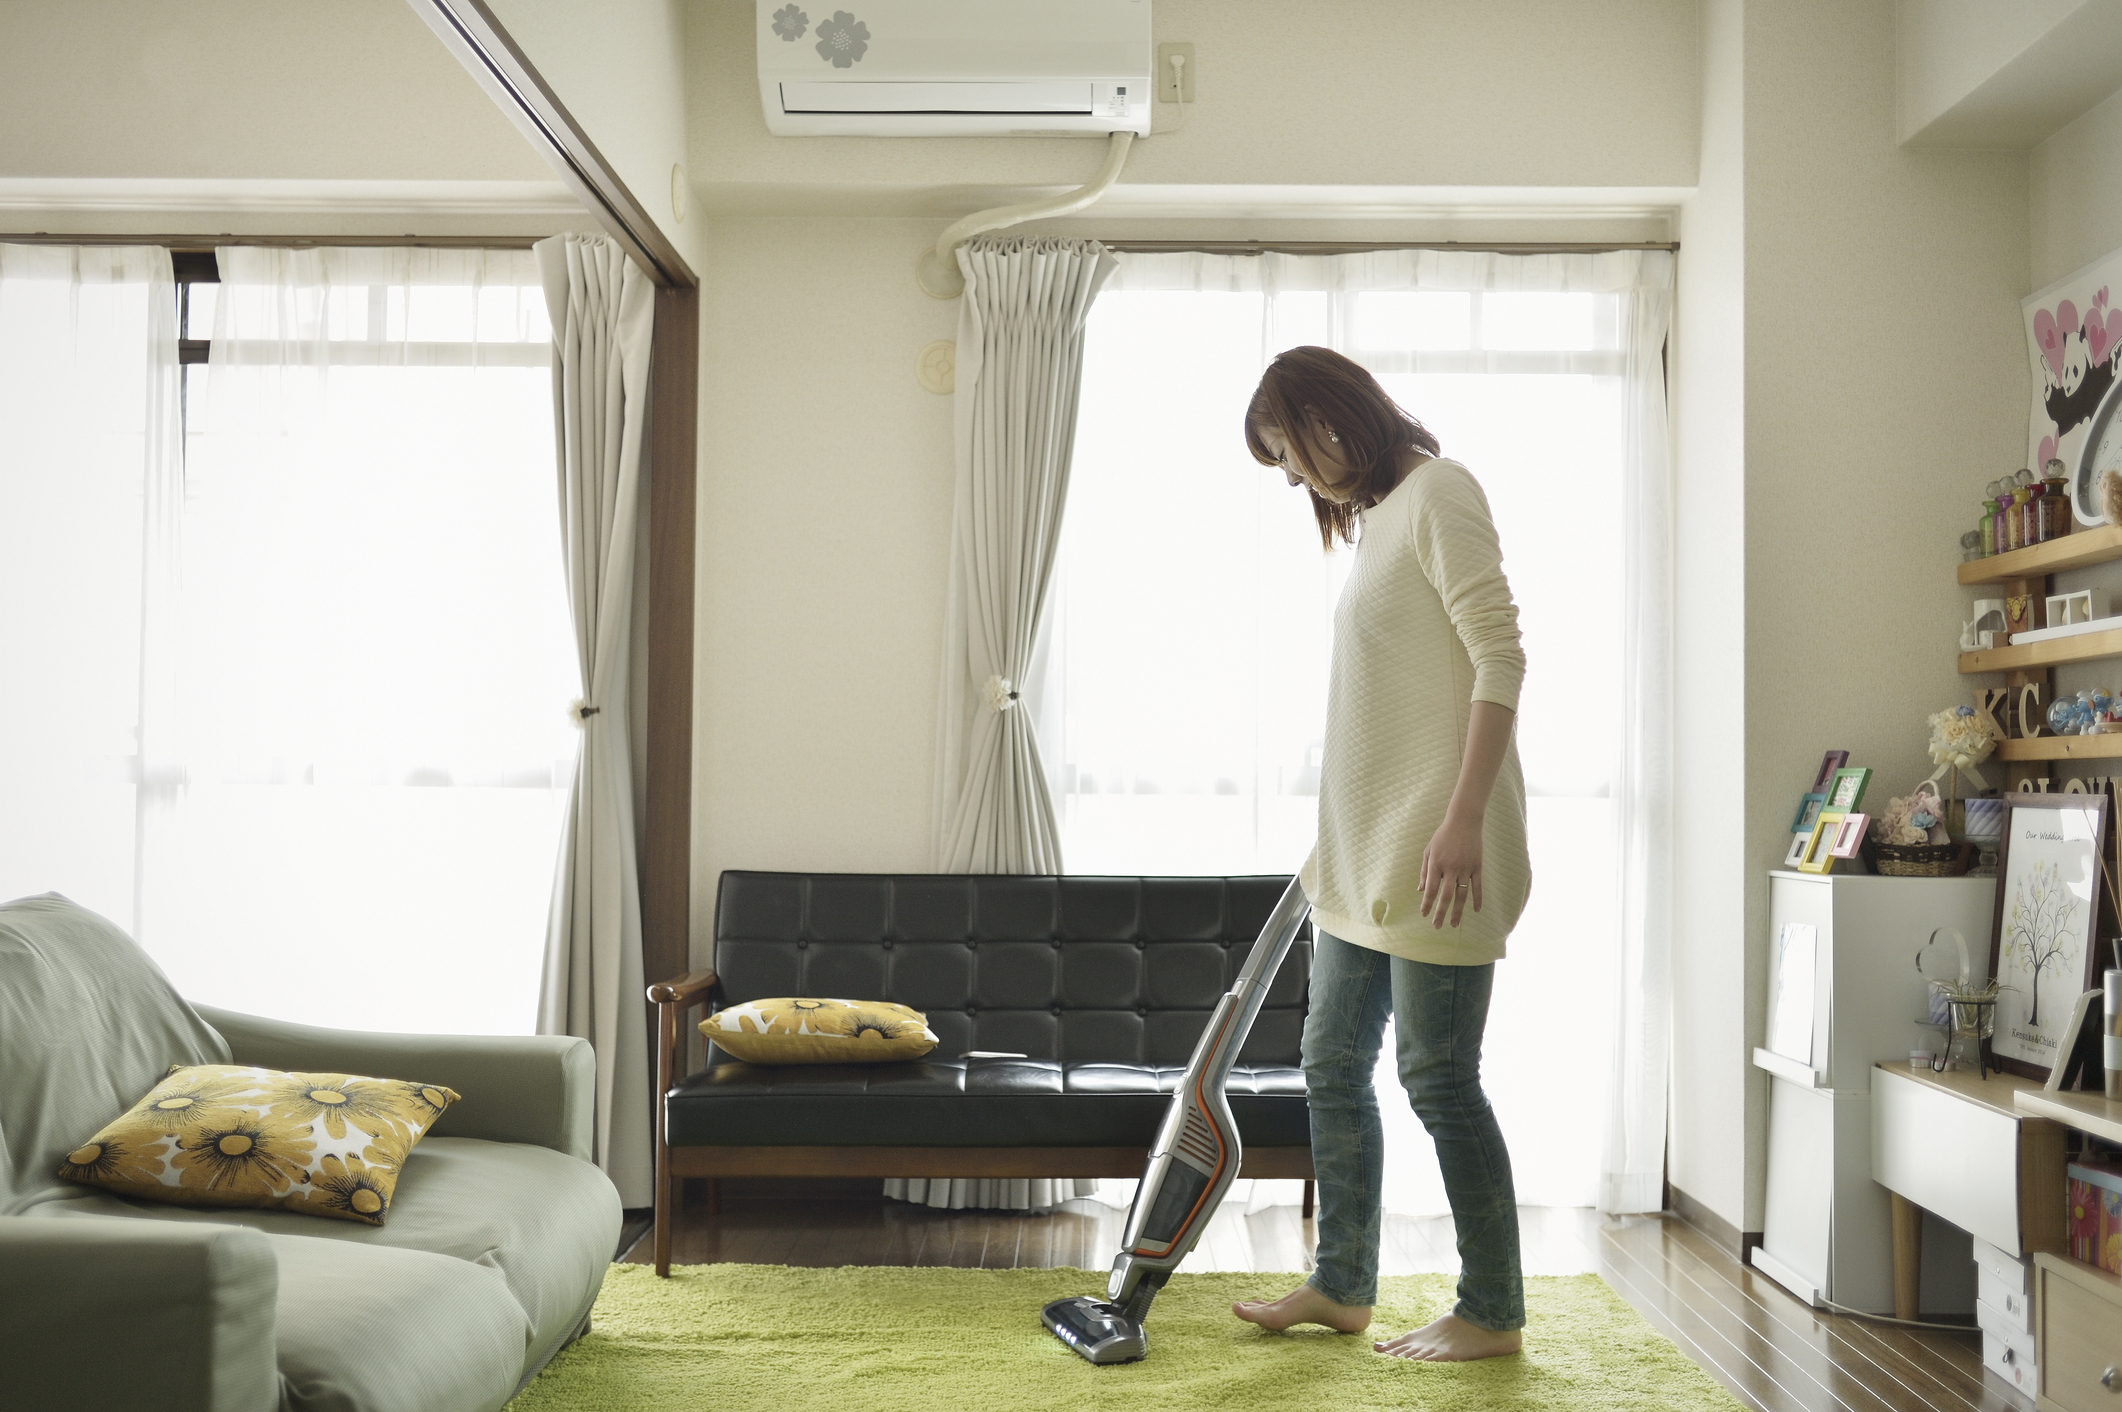 Japanese Women Are Unpaid for 1 Billion Worth of Housework